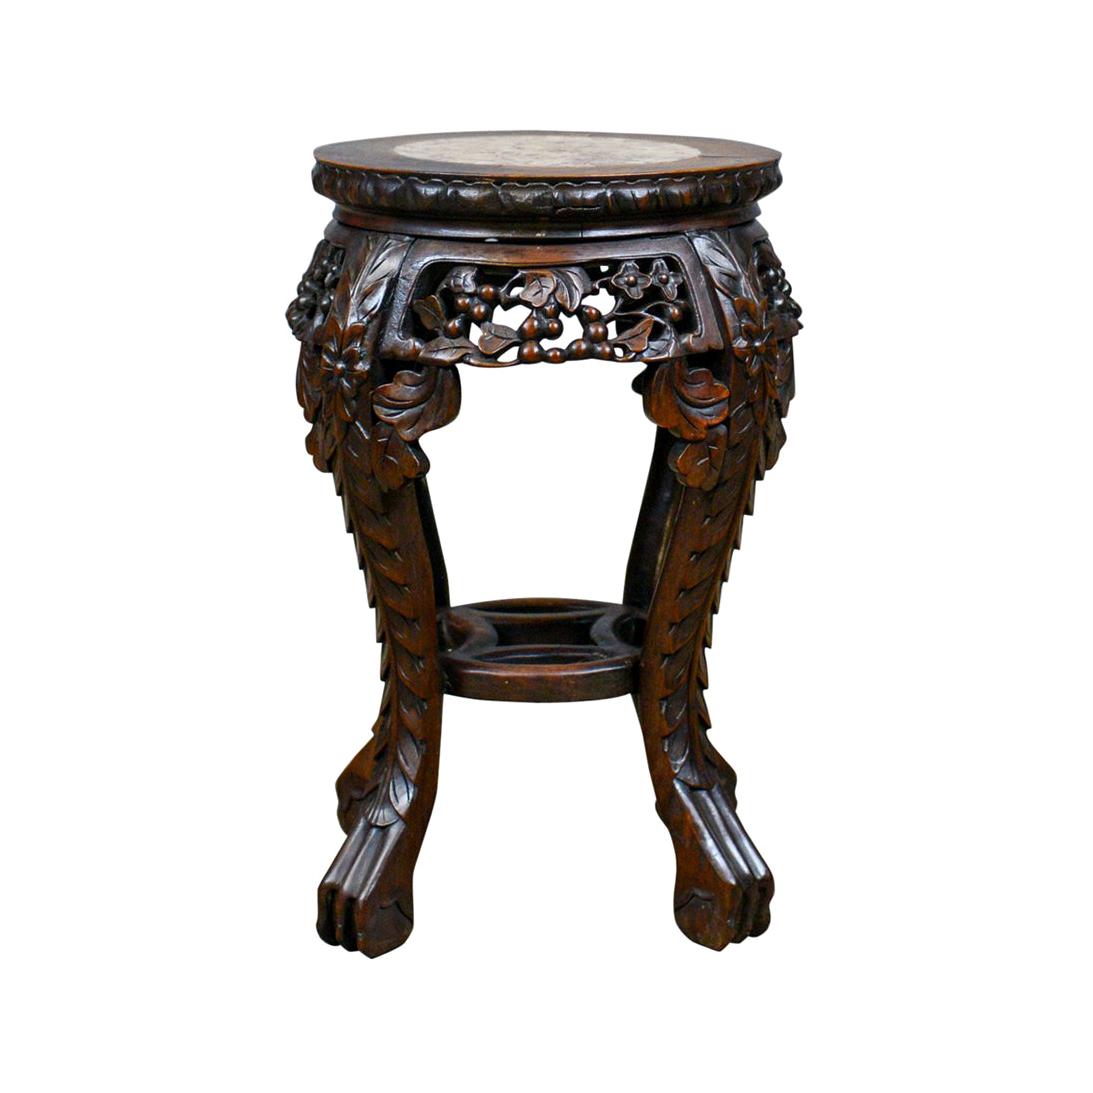 Antique Side Table, Carved, Chinese, Stand, Teak, Marble, circa 1900